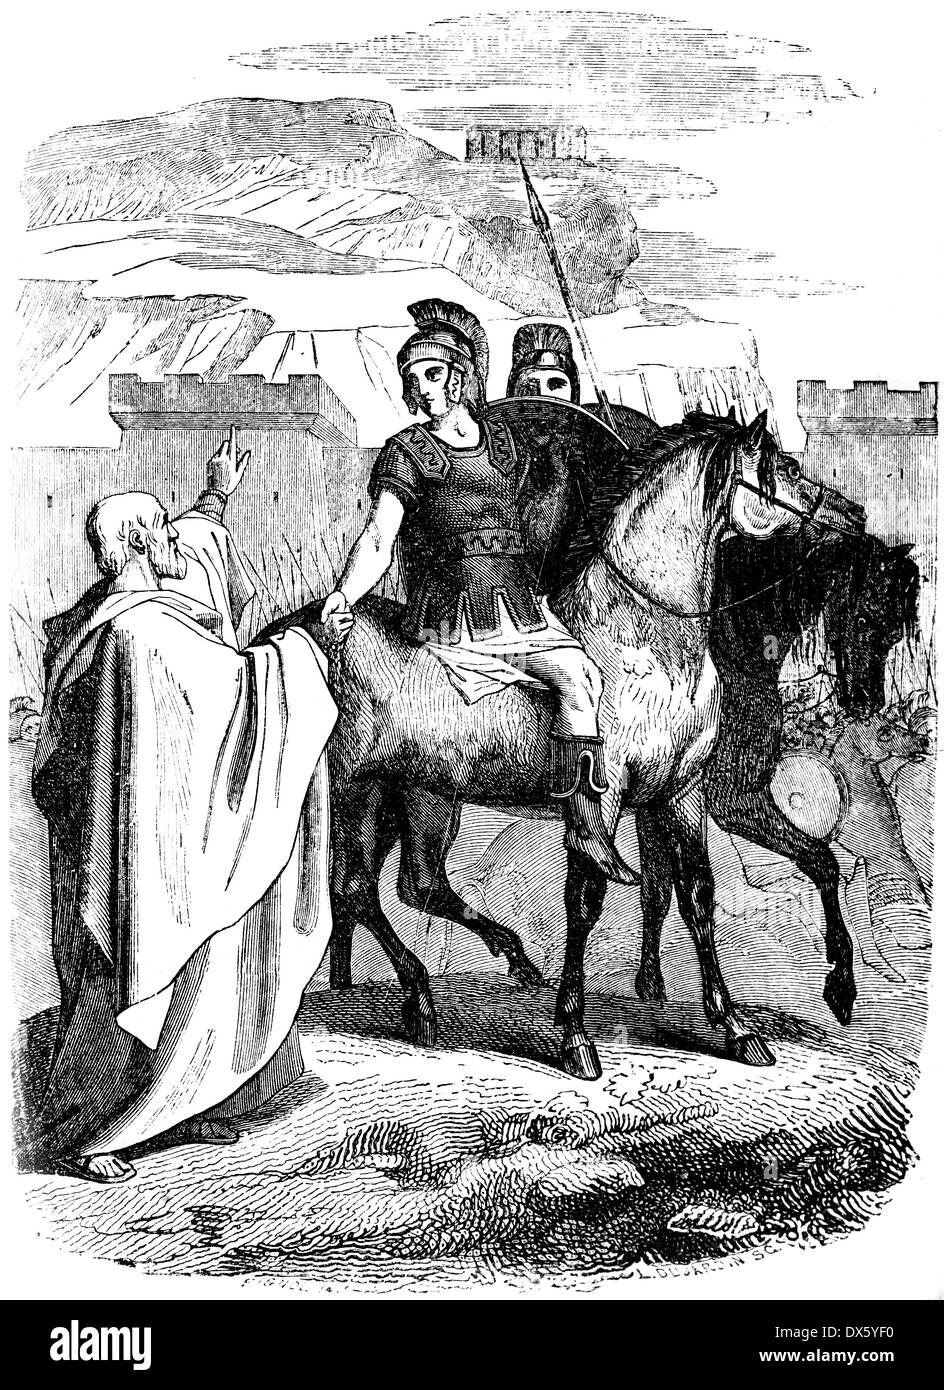 Alexander the Great and Aristotle, illustration from book dated 1878 Stock Photo